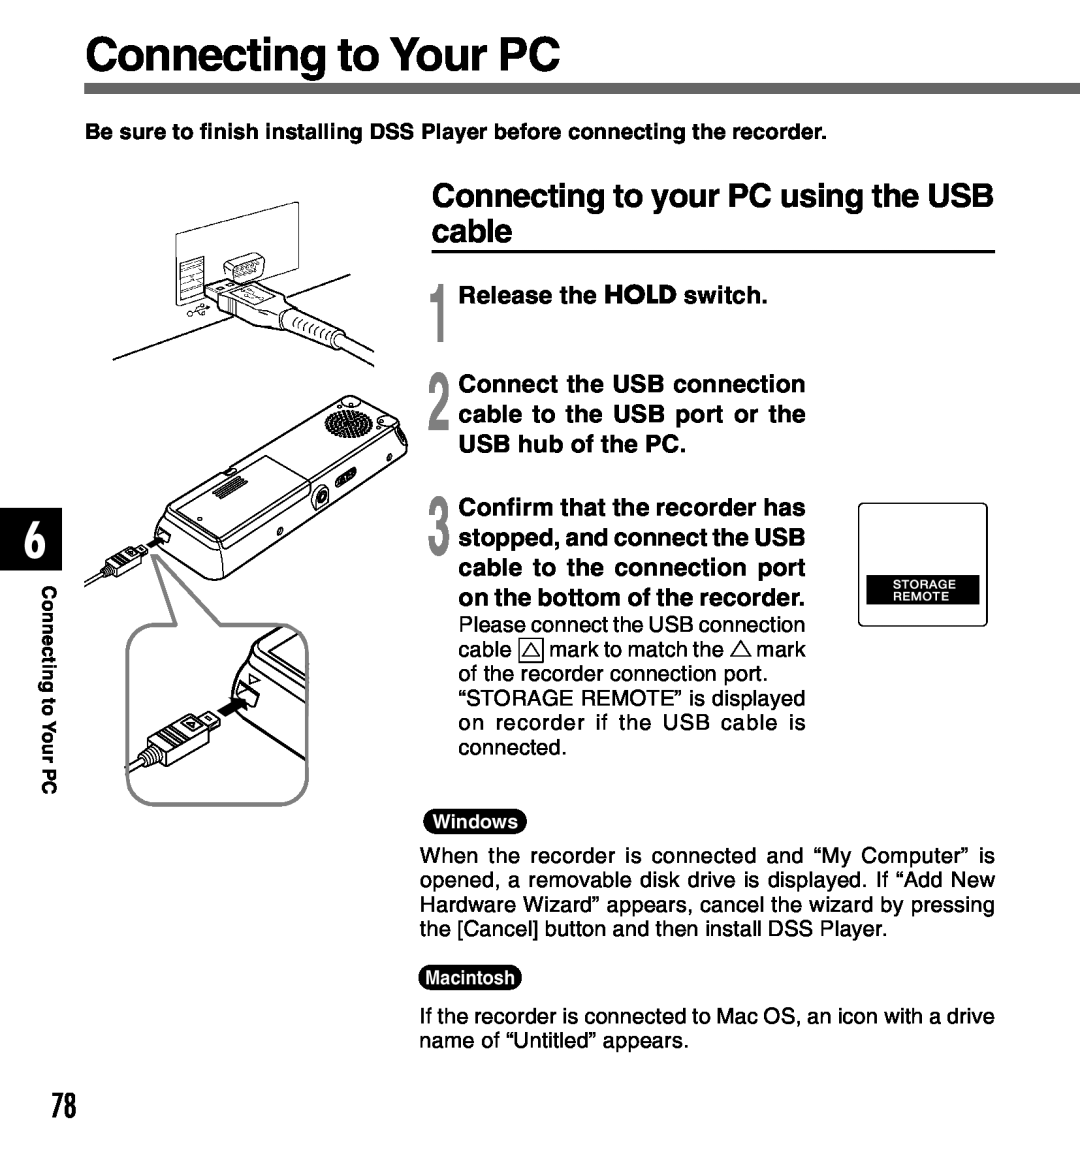 Olympus 2 manual Connecting to Your PC, Connecting to your PC using the USB cable, Release the HOLD switch 